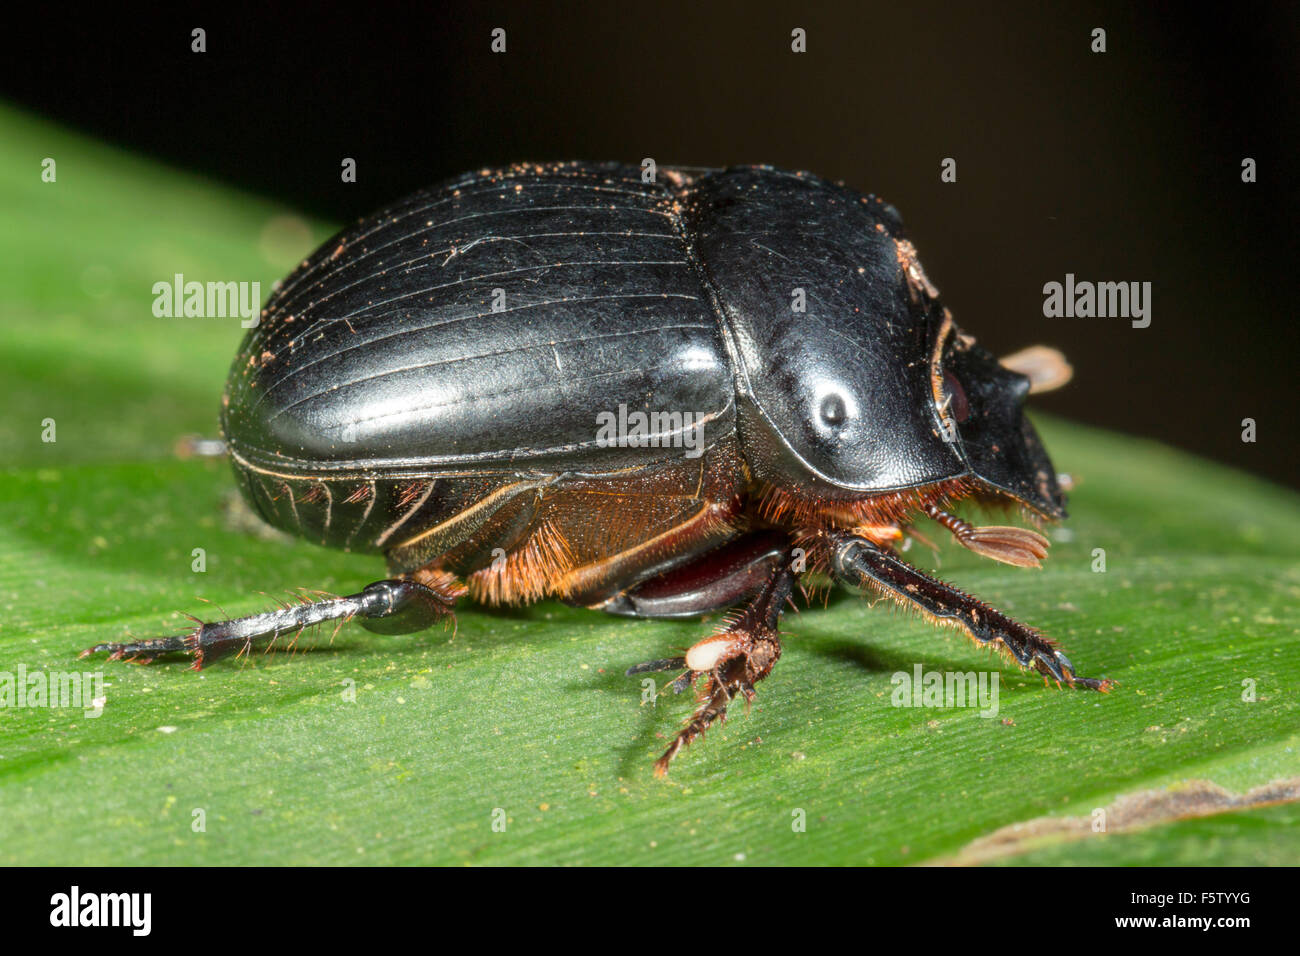 Scarab beetle resting on a leaf in the rainforest understory, Ecuador. There are parasitic or phoretic mites on its limbs. Stock Photo